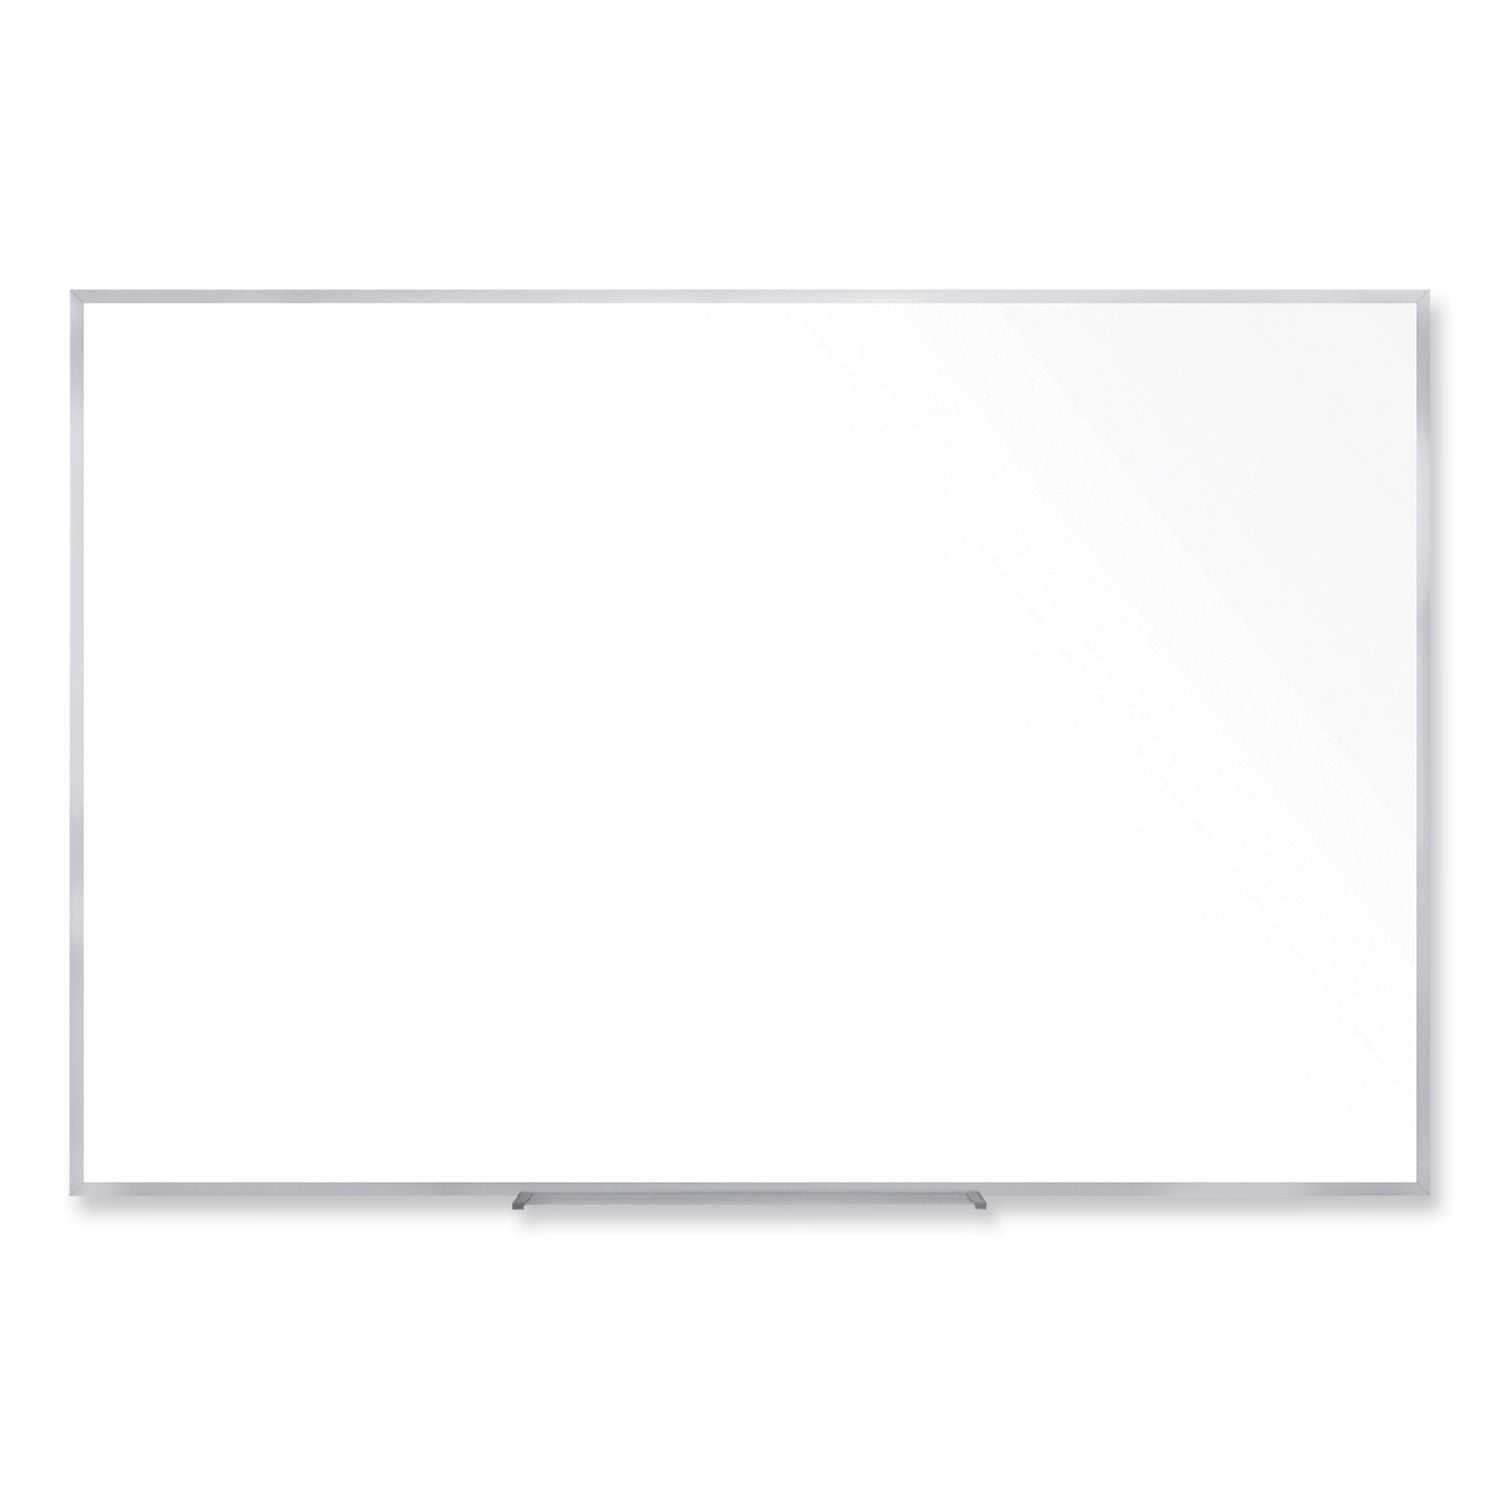 non-magnetic-whiteboard-with-aluminum-frame-6063-x-4847-white-surface-satin-aluminum-frame-ships-in-7-10-business-days_ghem2454 - 1